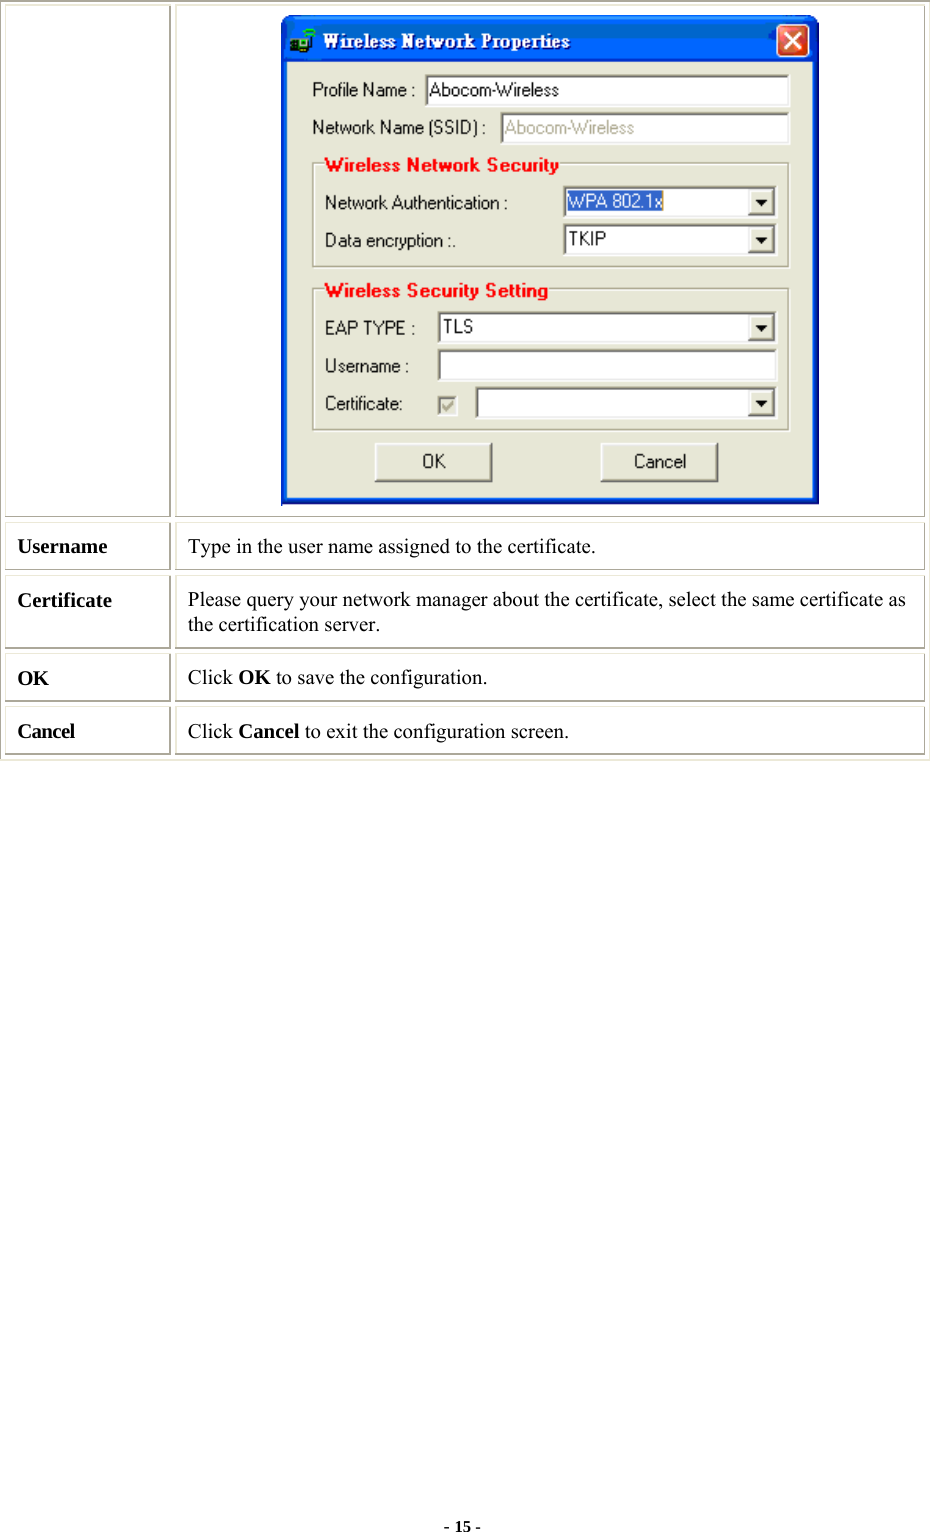 - 15 -  Username  Type in the user name assigned to the certificate. Certificate  Please query your network manager about the certificate, select the same certificate as the certification server. OK  Click OK to save the configuration. Cancel  Click Cancel to exit the configuration screen.                 